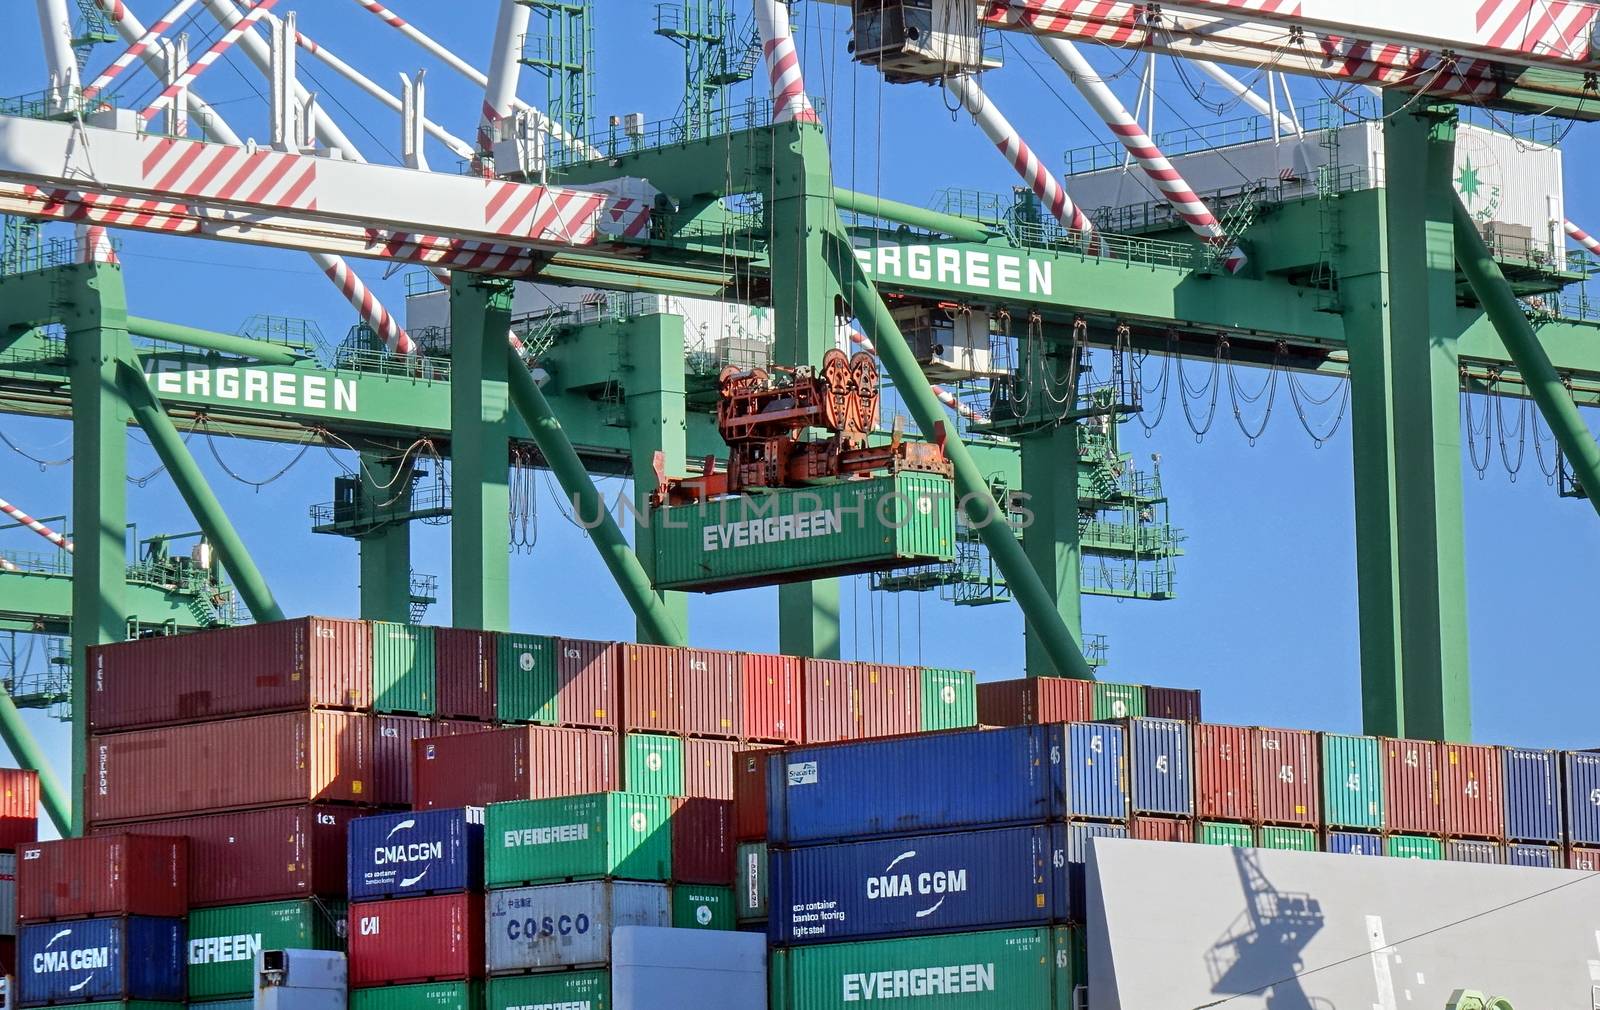 KAOHSIUNG, TAIWAN -- JUNE 2, 2019: Containers are being loaded onto ships in Kaohsiung Port.